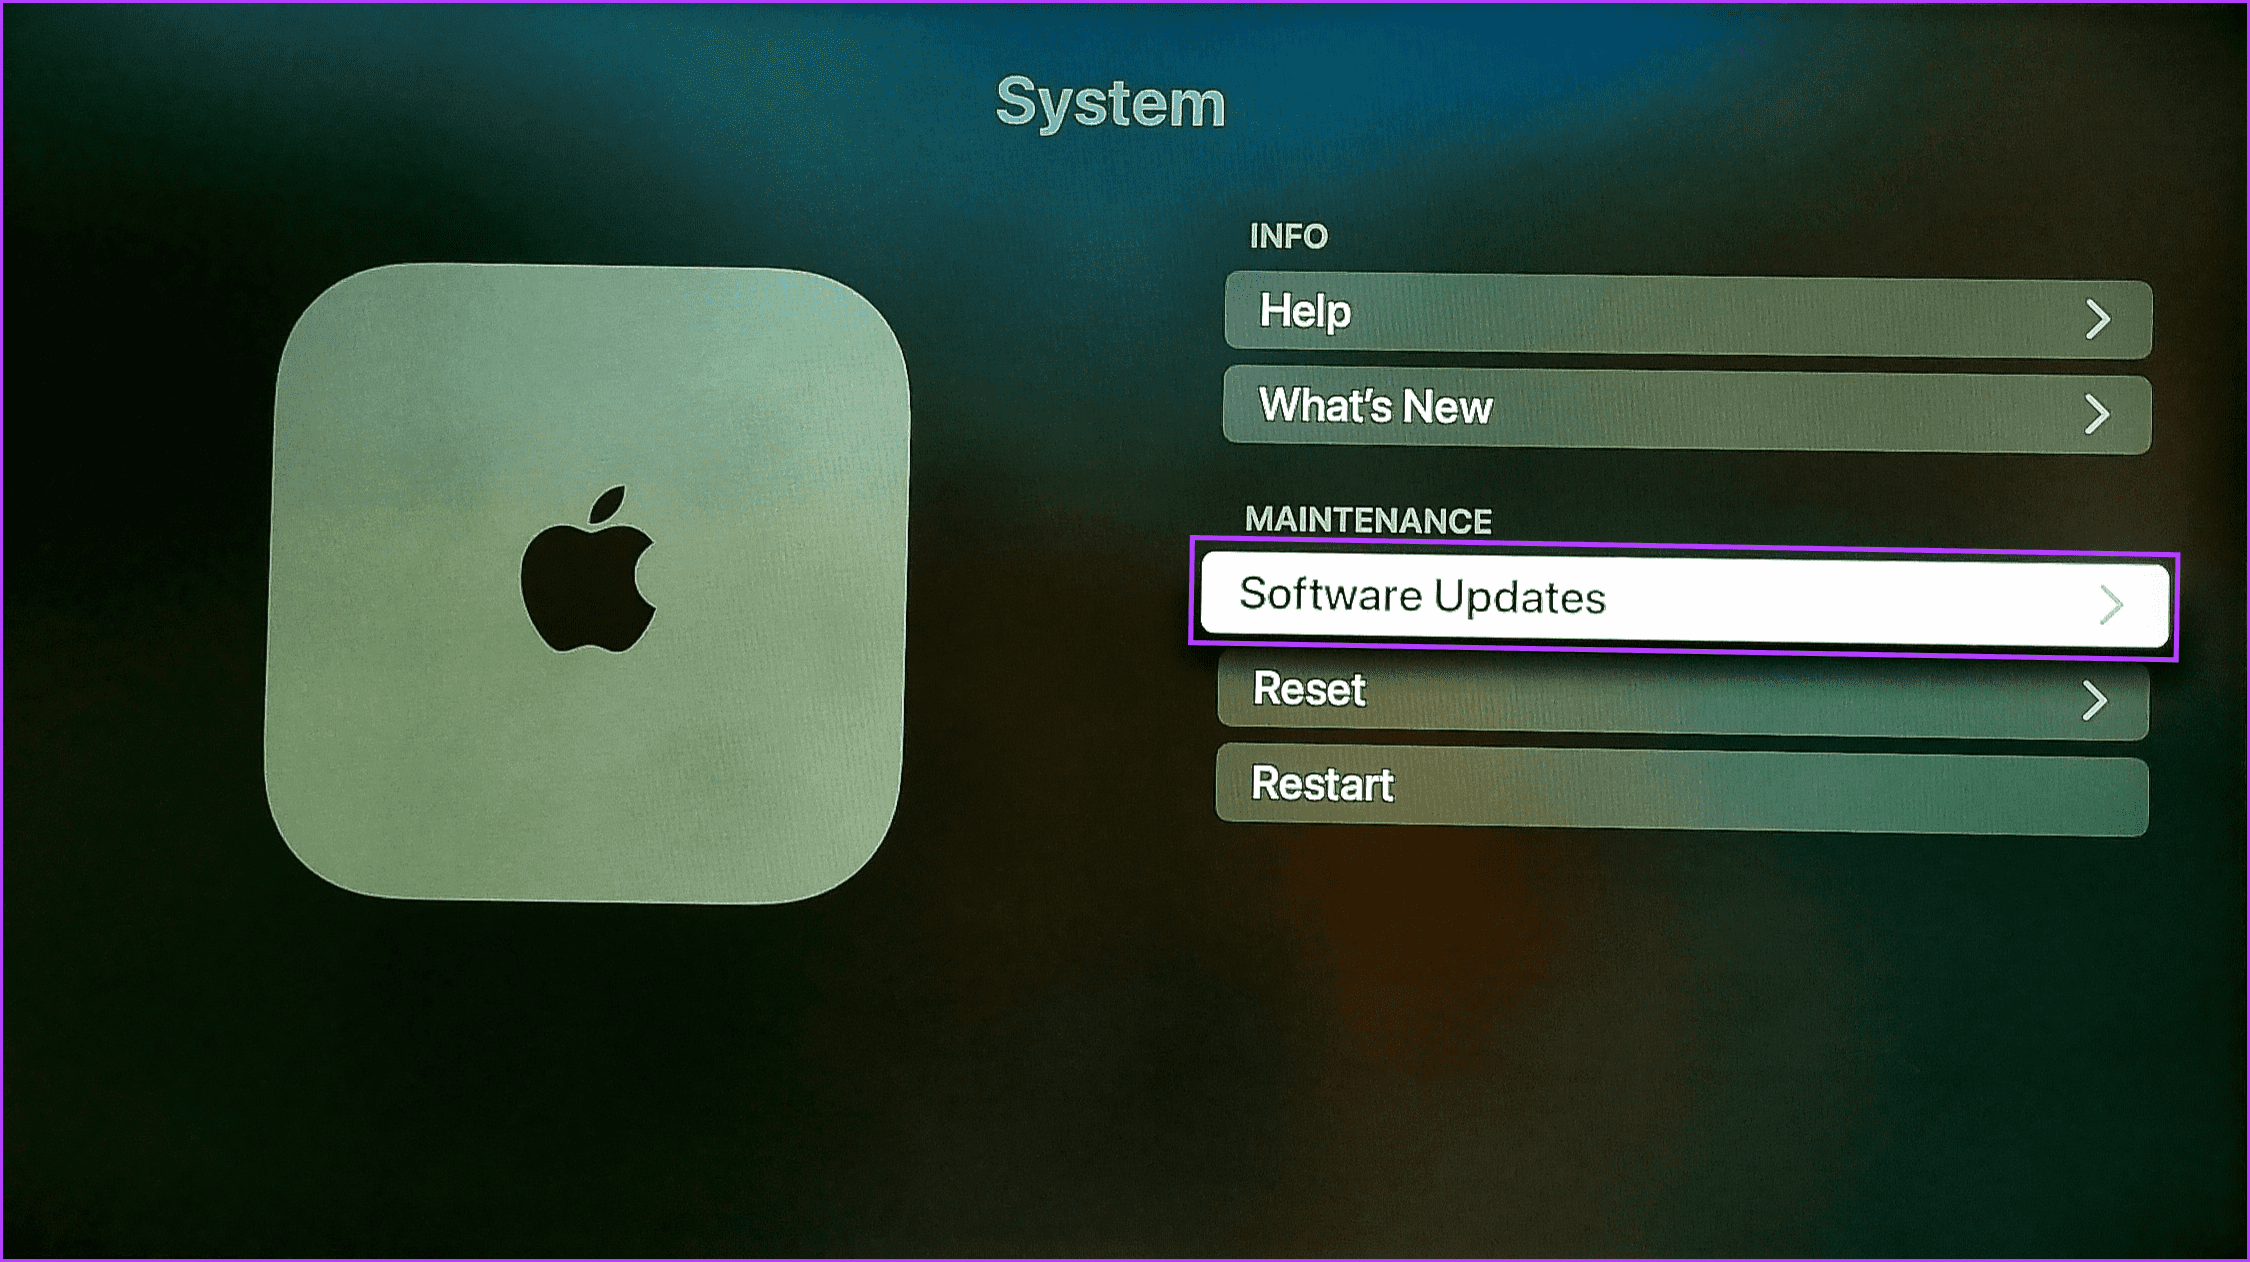 Select Software Updates 1